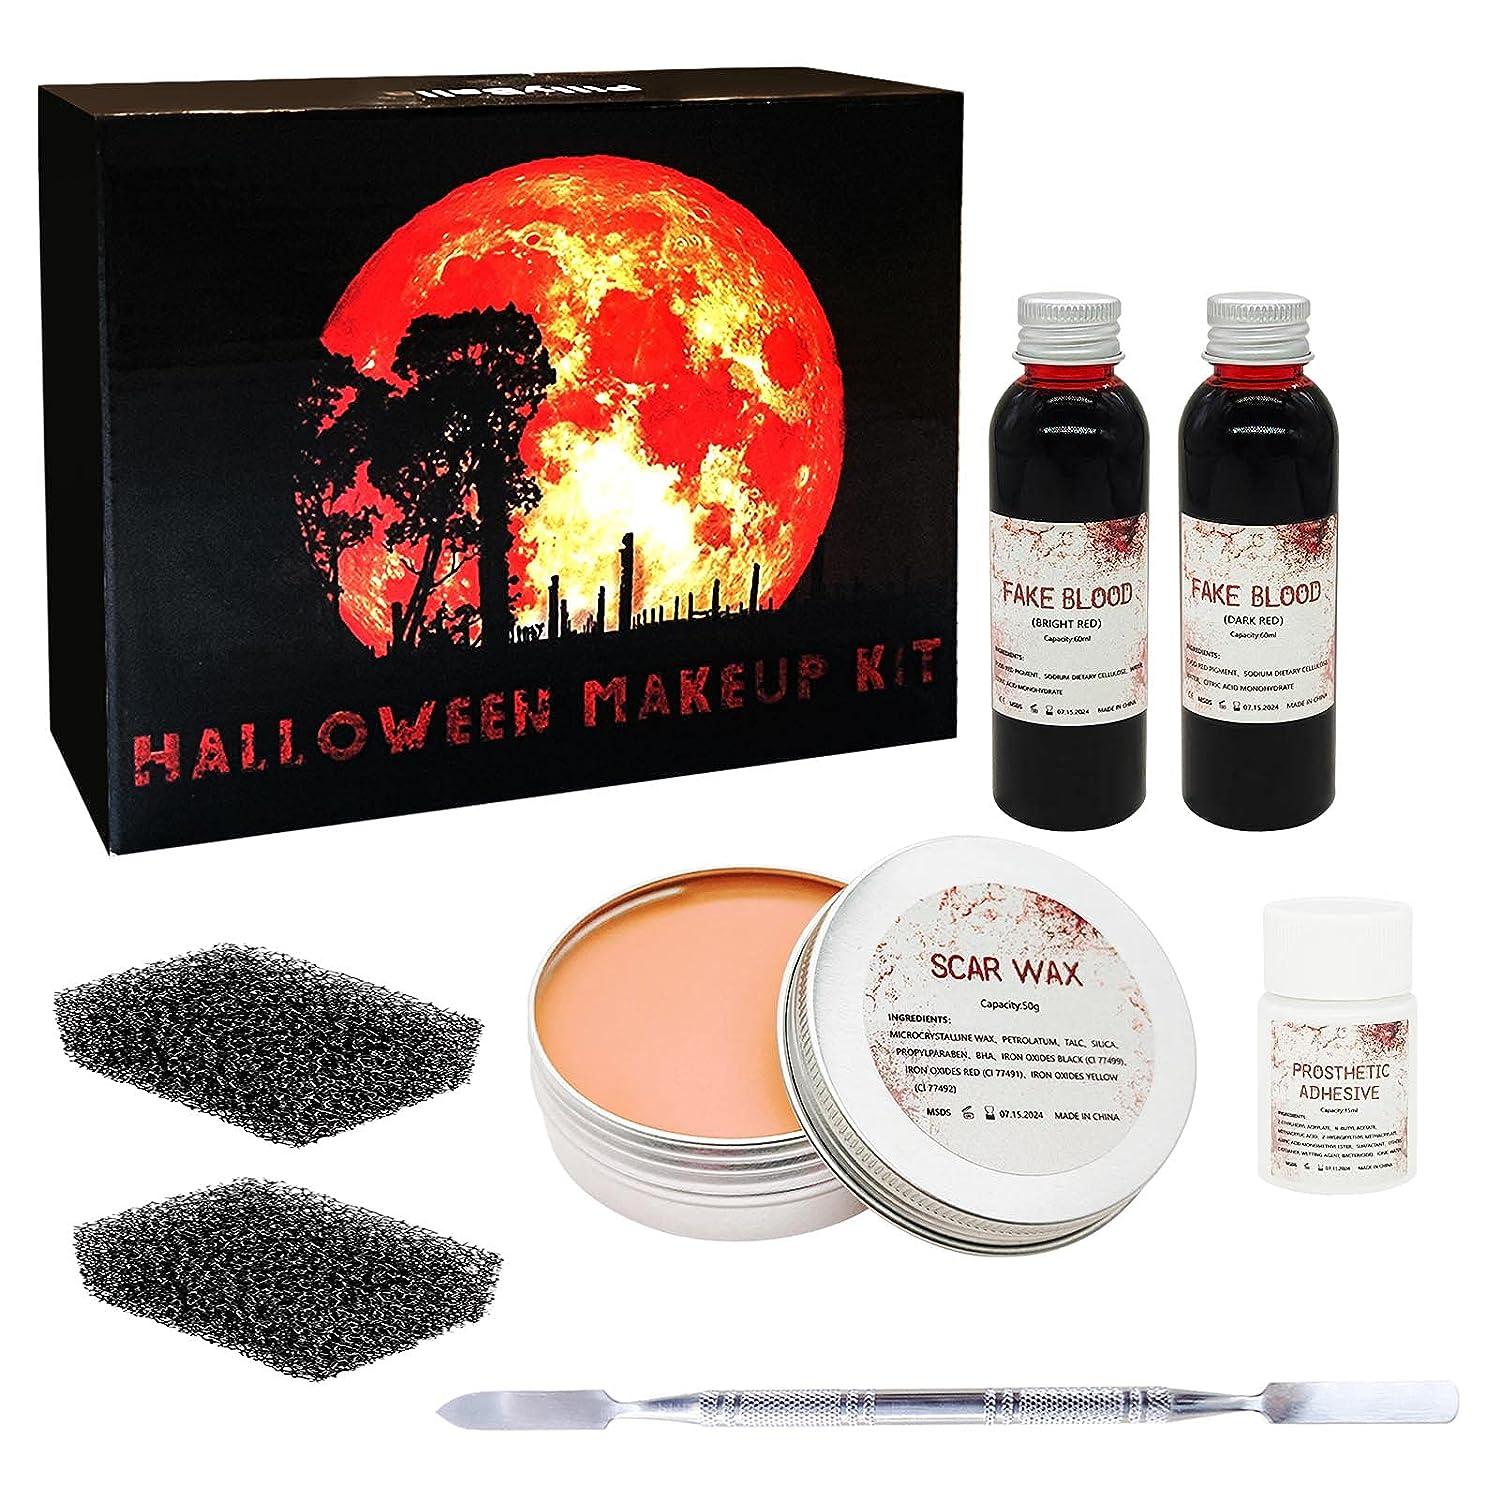  Hywestger Halloween Special Effects Makeup Kit,6 Pieces All In  One Makeup Kit With Stipple Sponges,Fake Blood, Makeup Wax Perfect for  Halloween Party Cosplay Stage Makeup Kit : Beauty & Personal